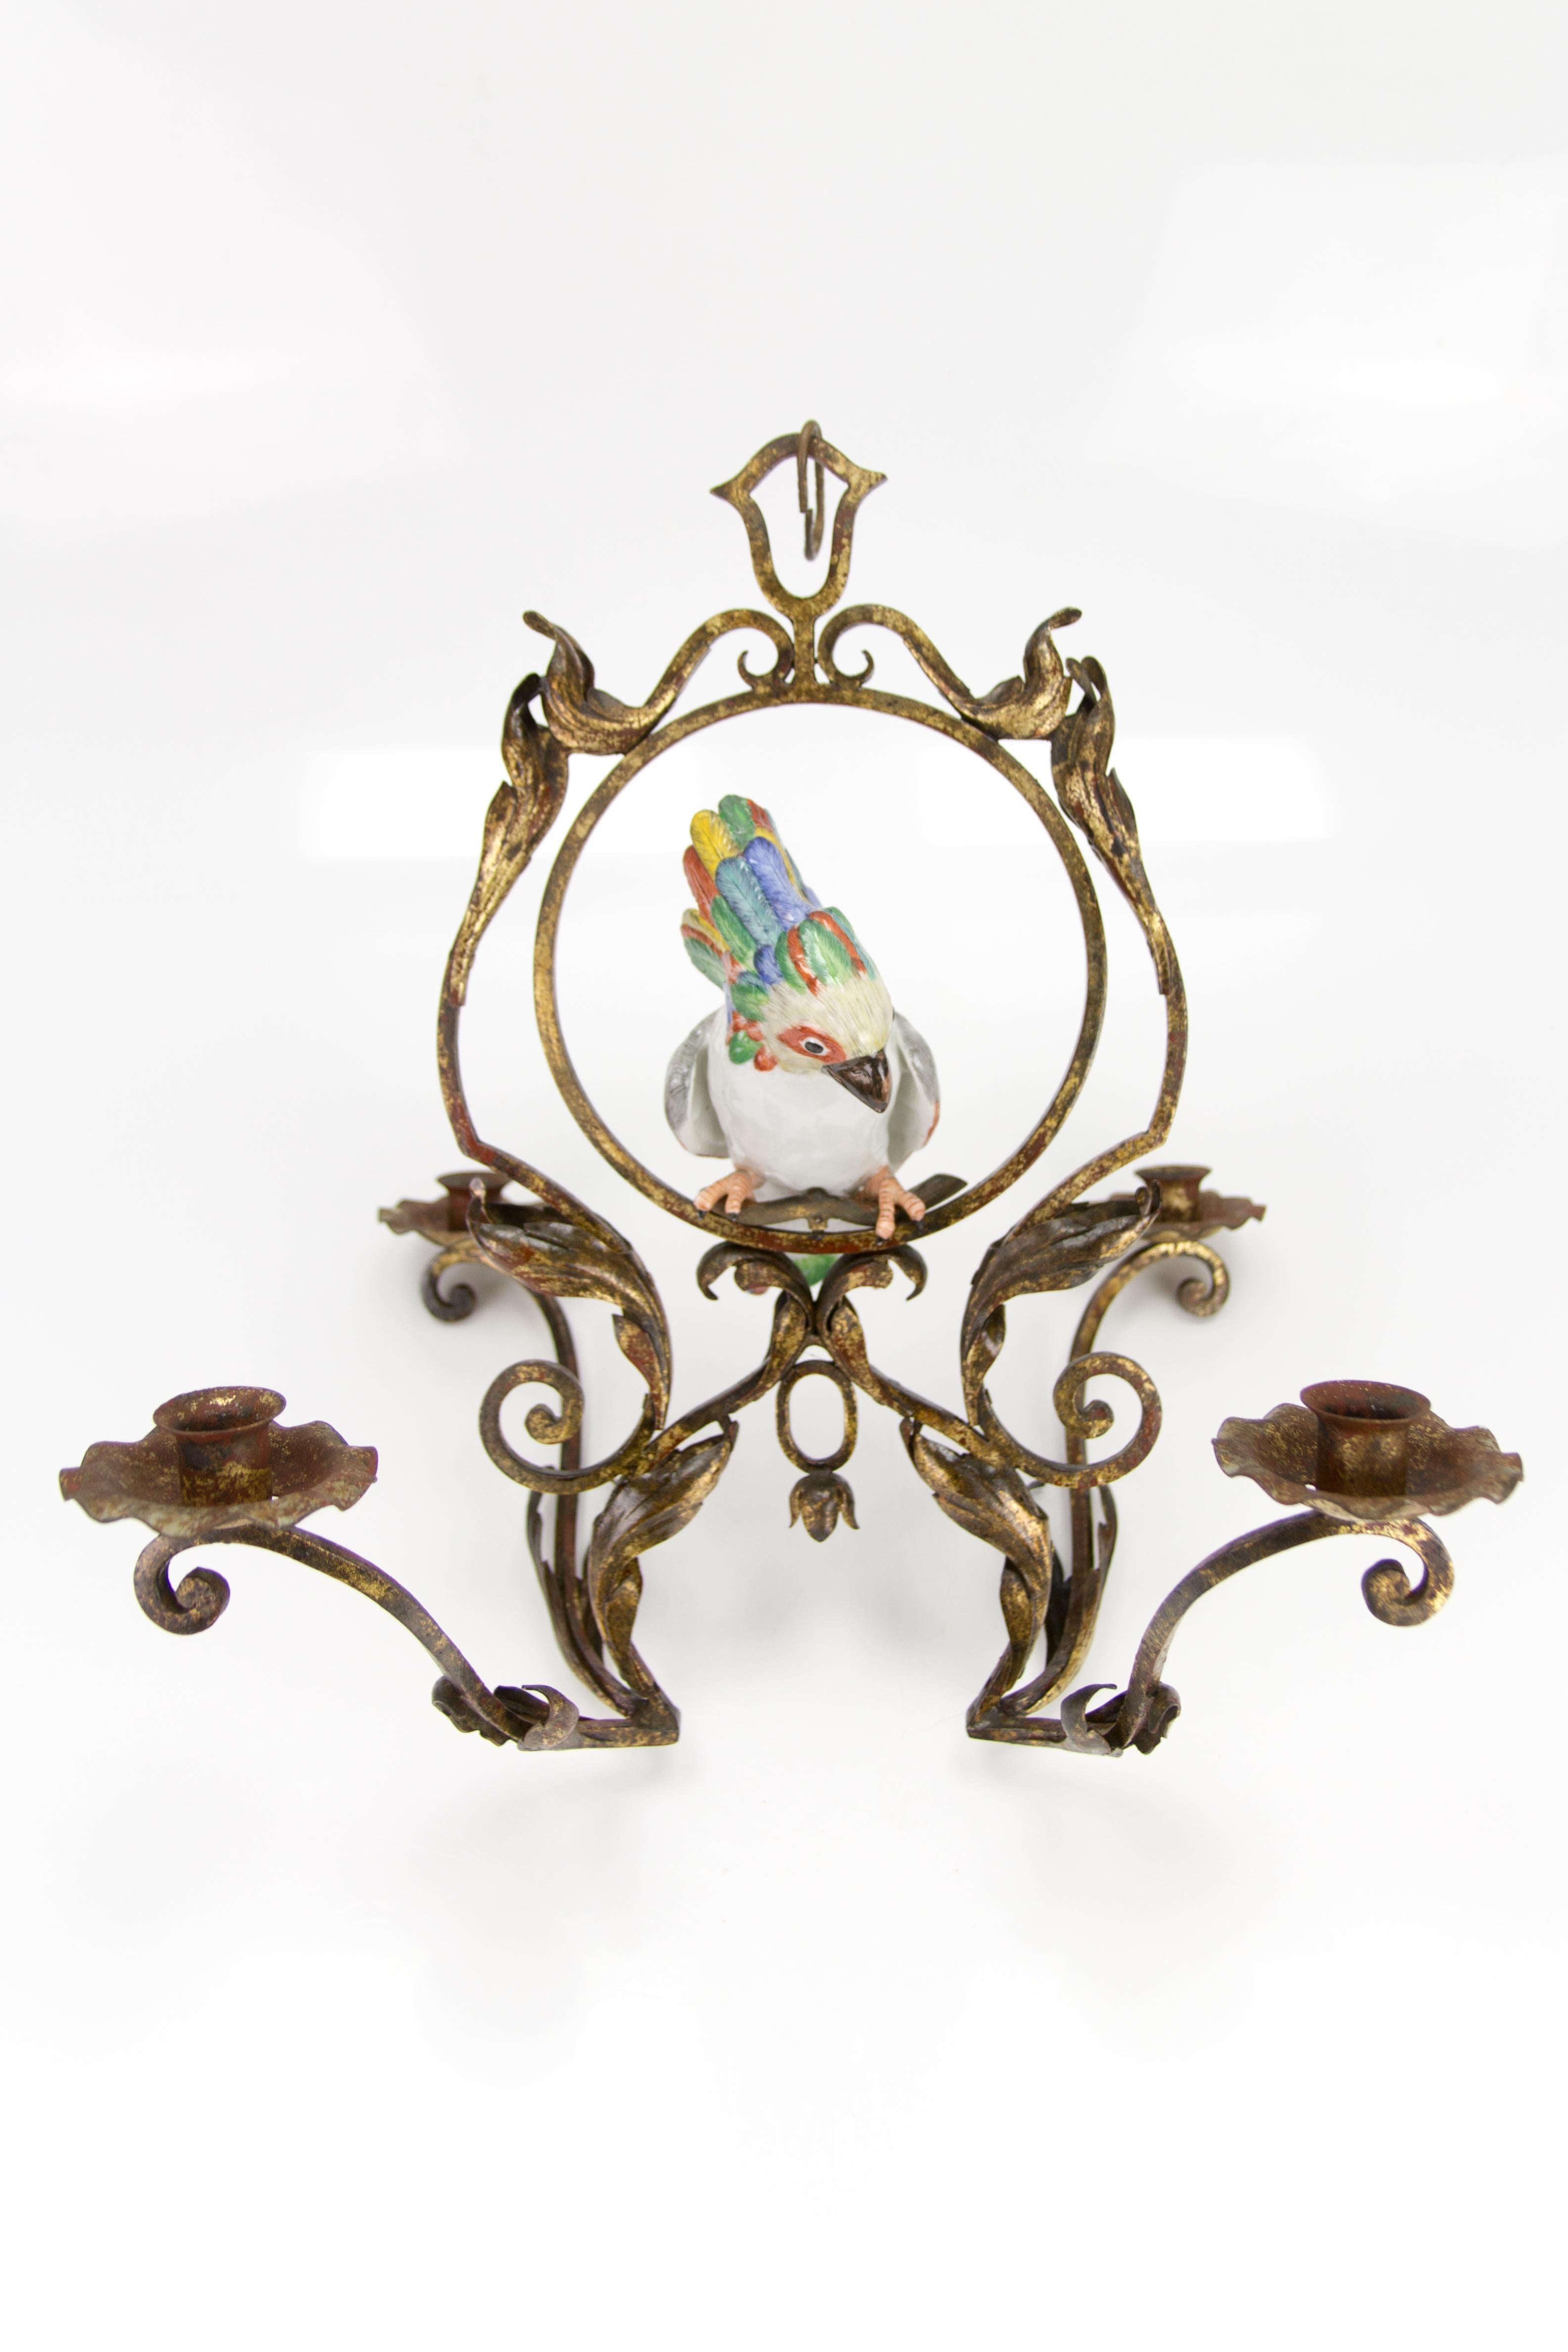 French Art Nouveau Wrought Iron and Porcelain Parrot Figurine Candle Chandelier 11